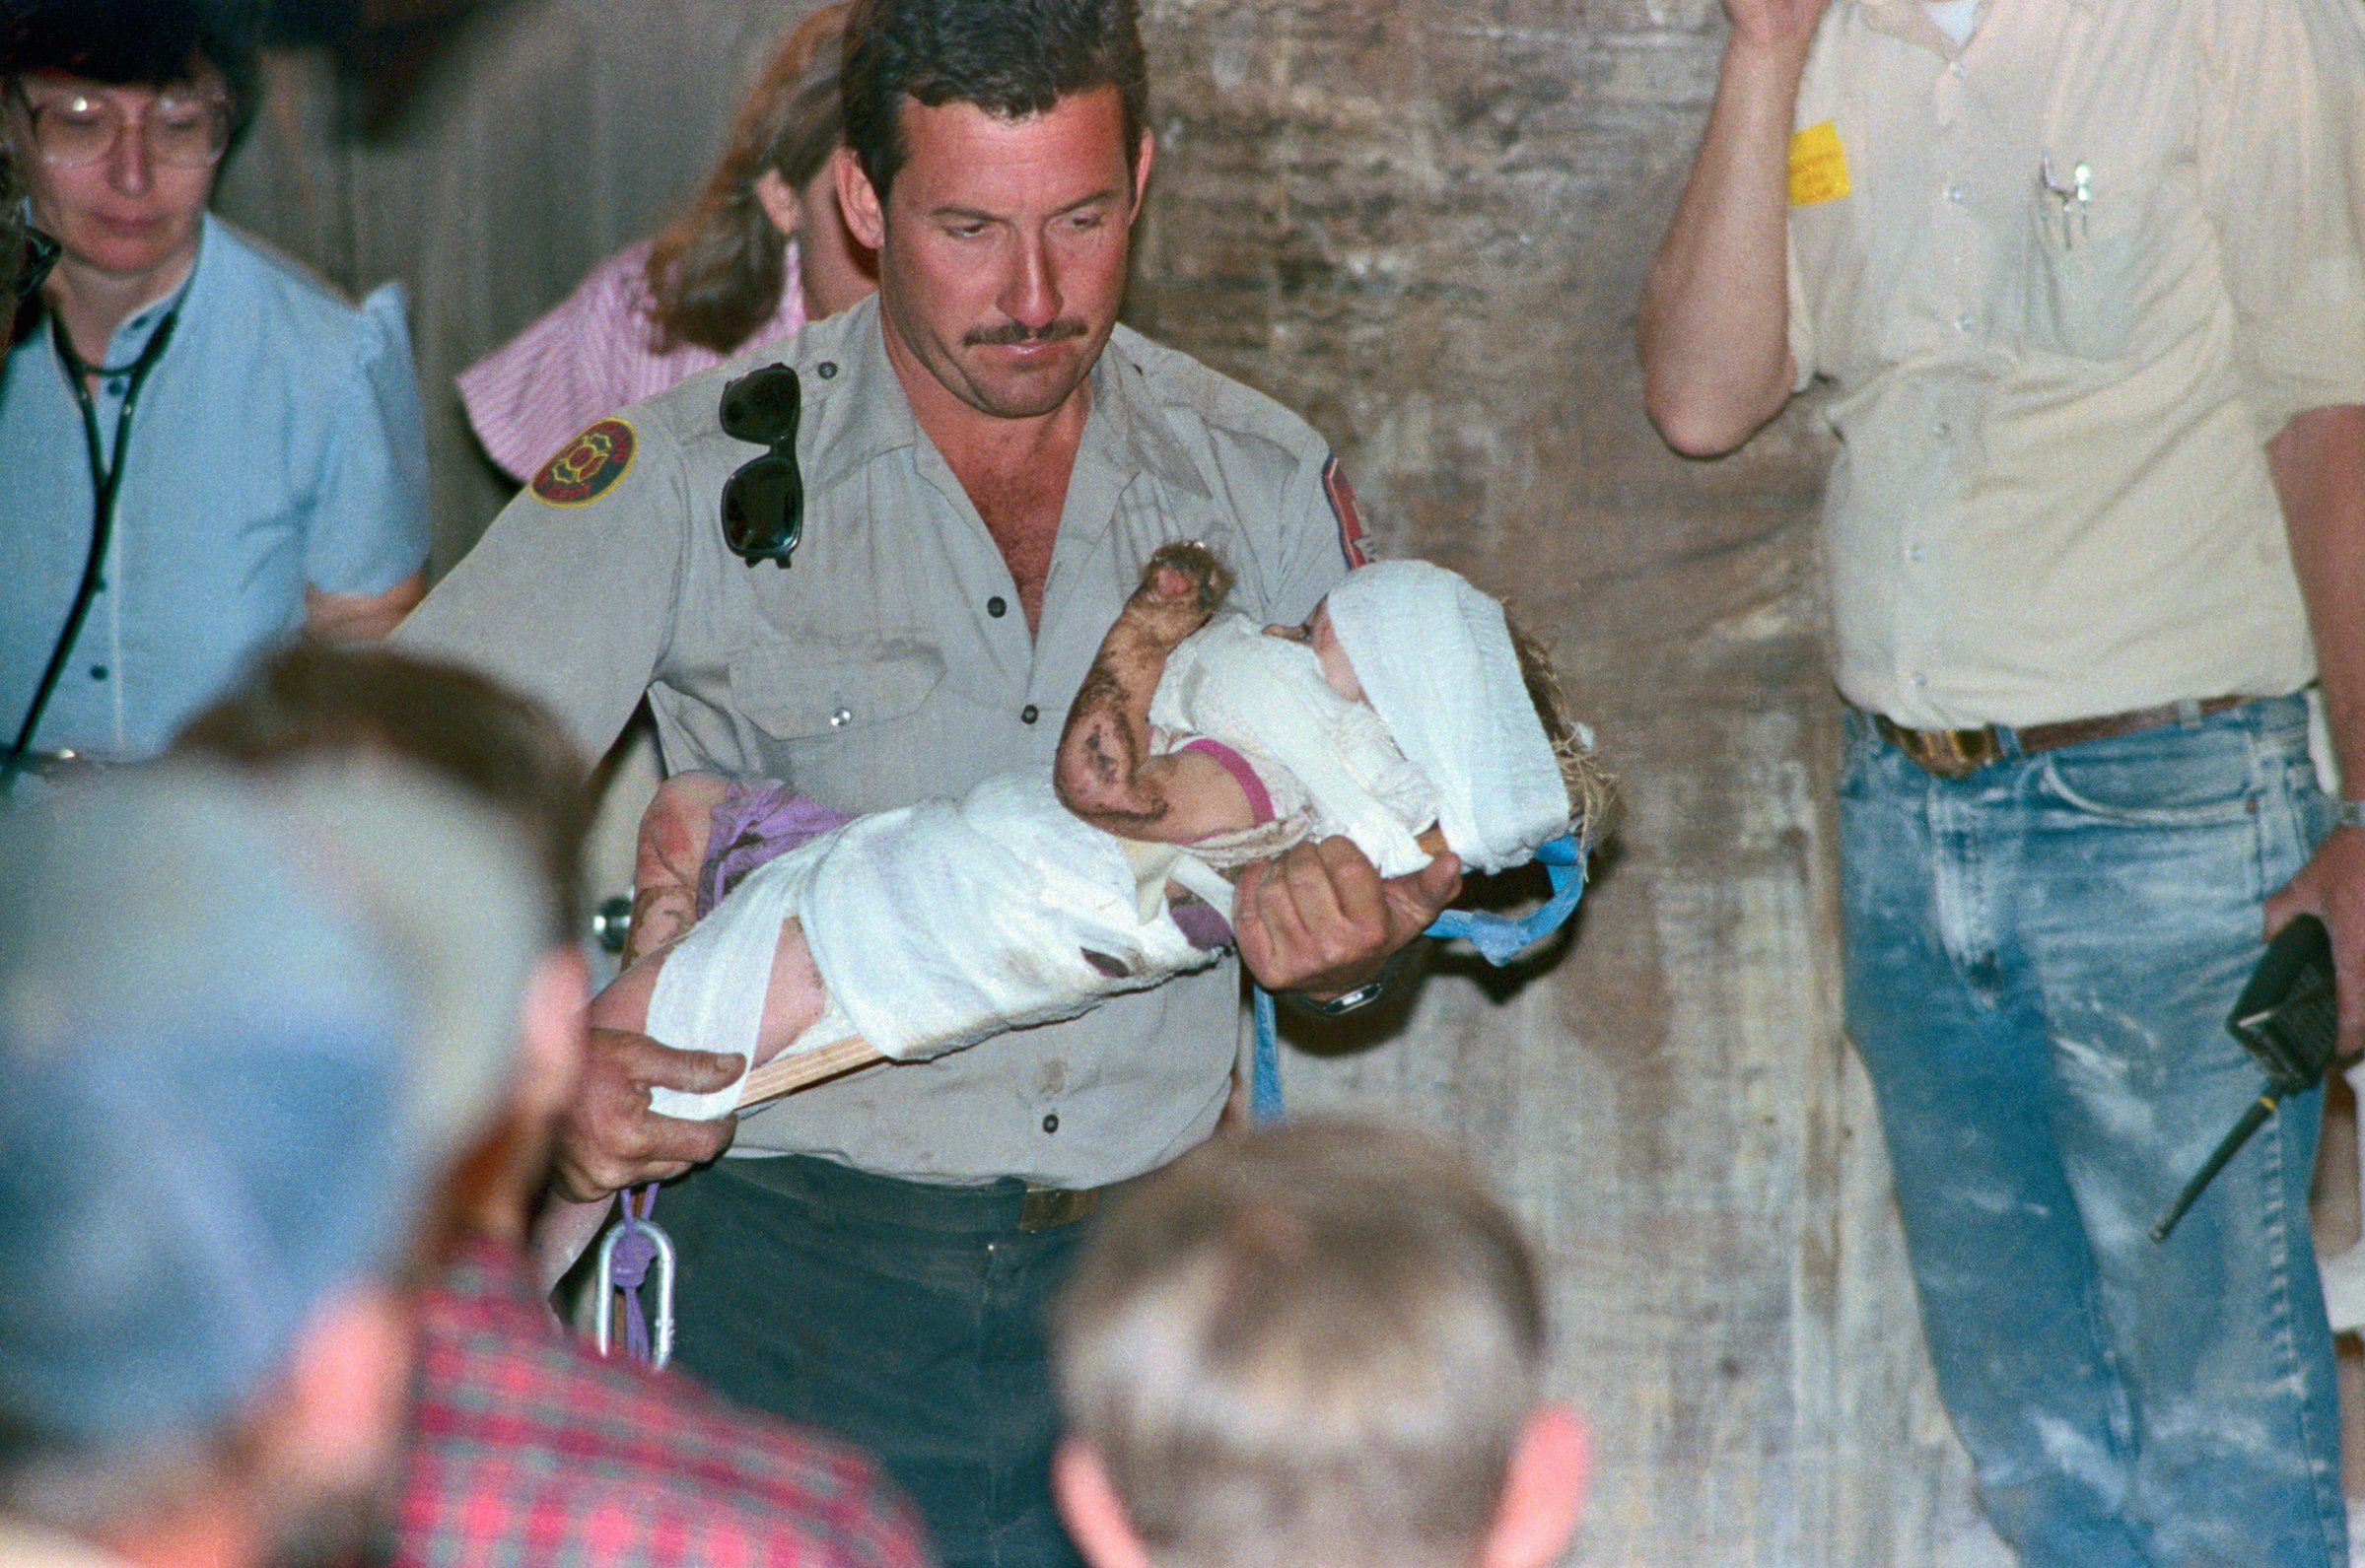 Rescuer rushes baby rescued from fall into a well where lay for three days before she was rescued, Oct. 16, 1987.